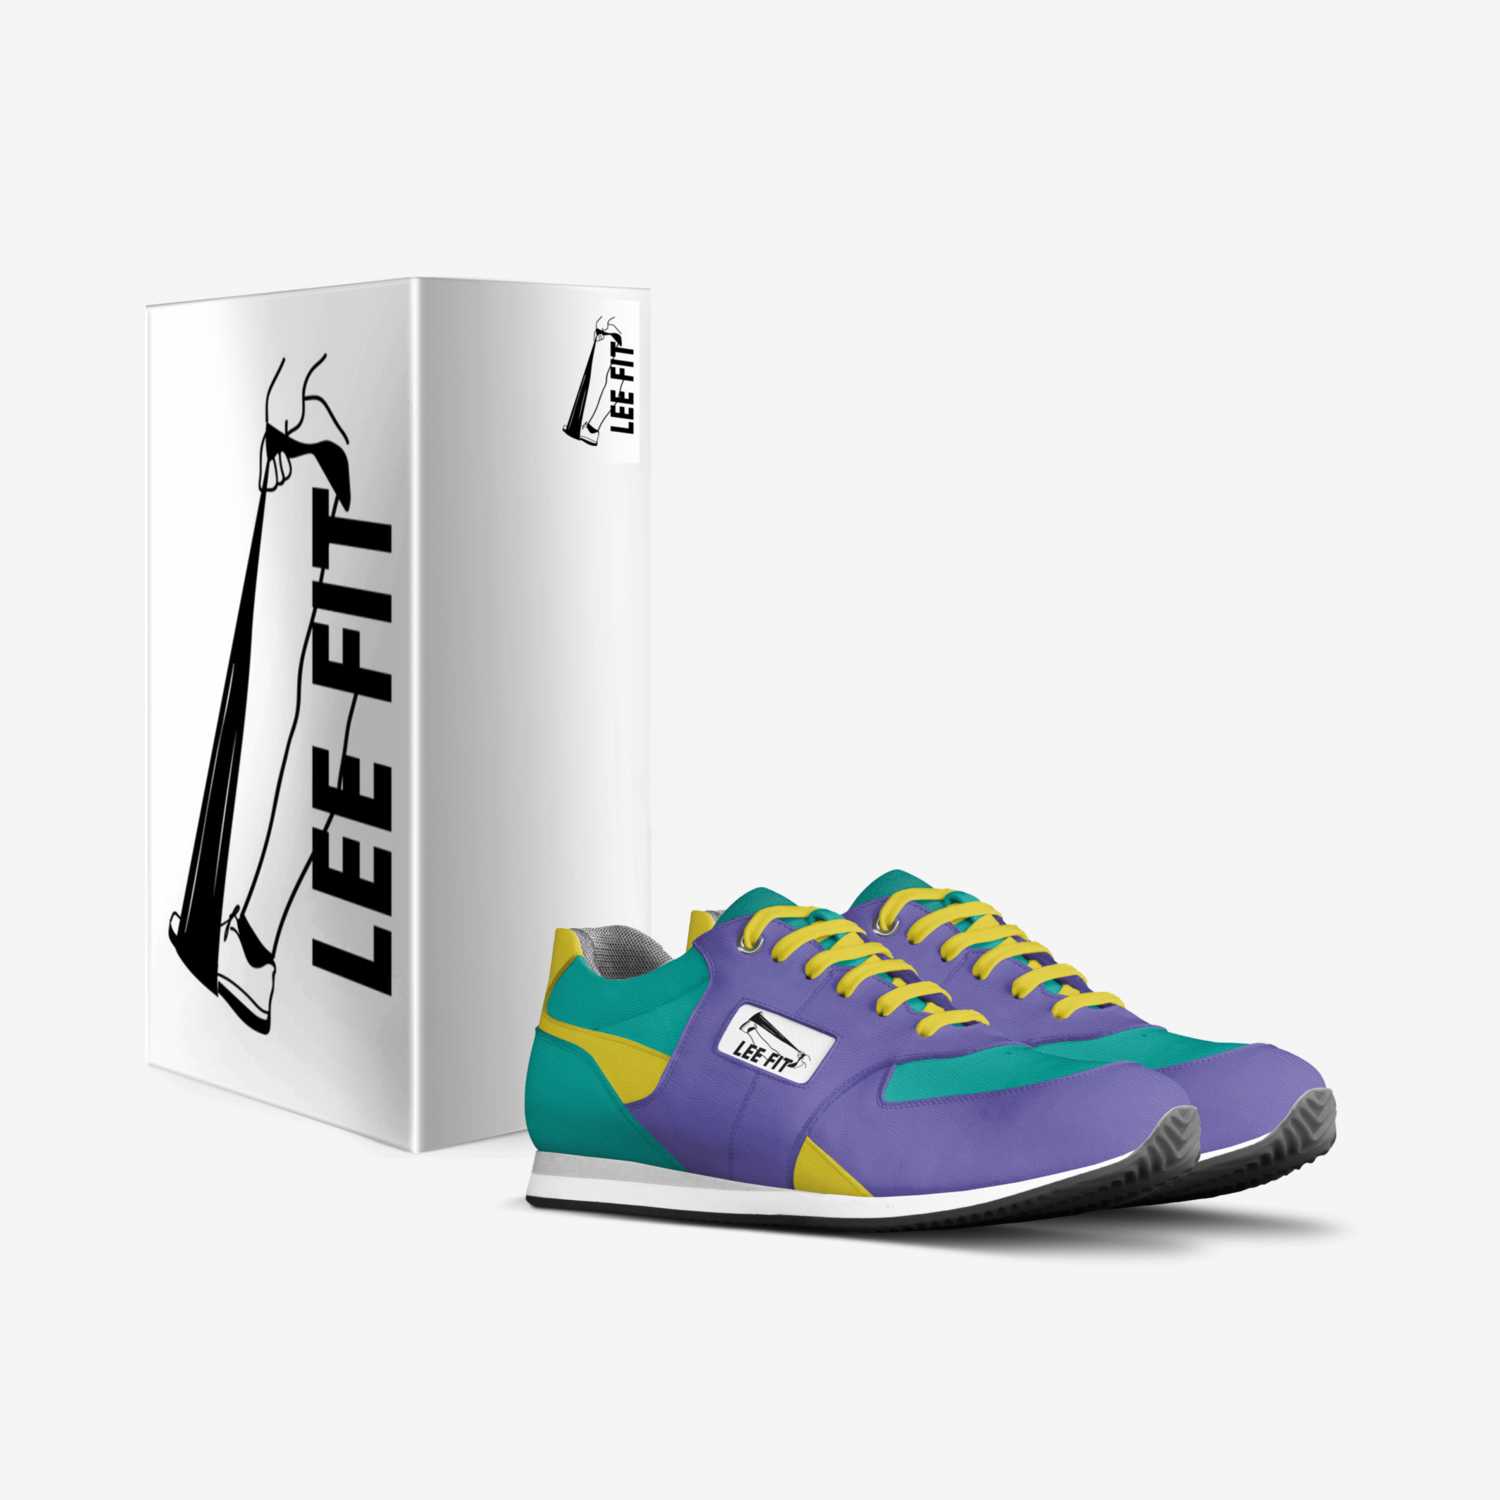 Lee_fit87 custom made in Italy shoes by Darrick Lee Mcneill | Box view